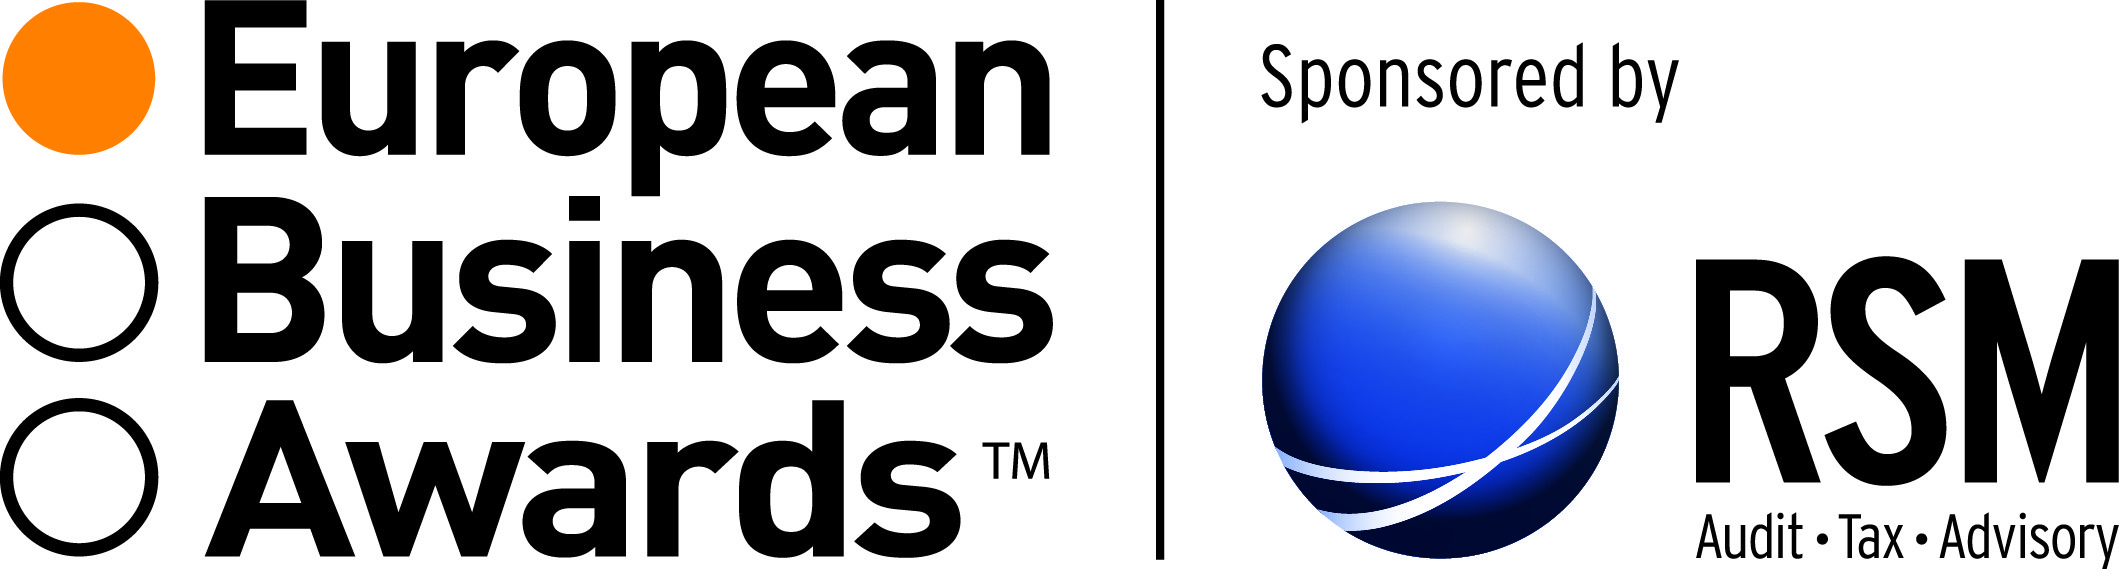 Eakin Named National Champion in the European Business Awards 2014/15